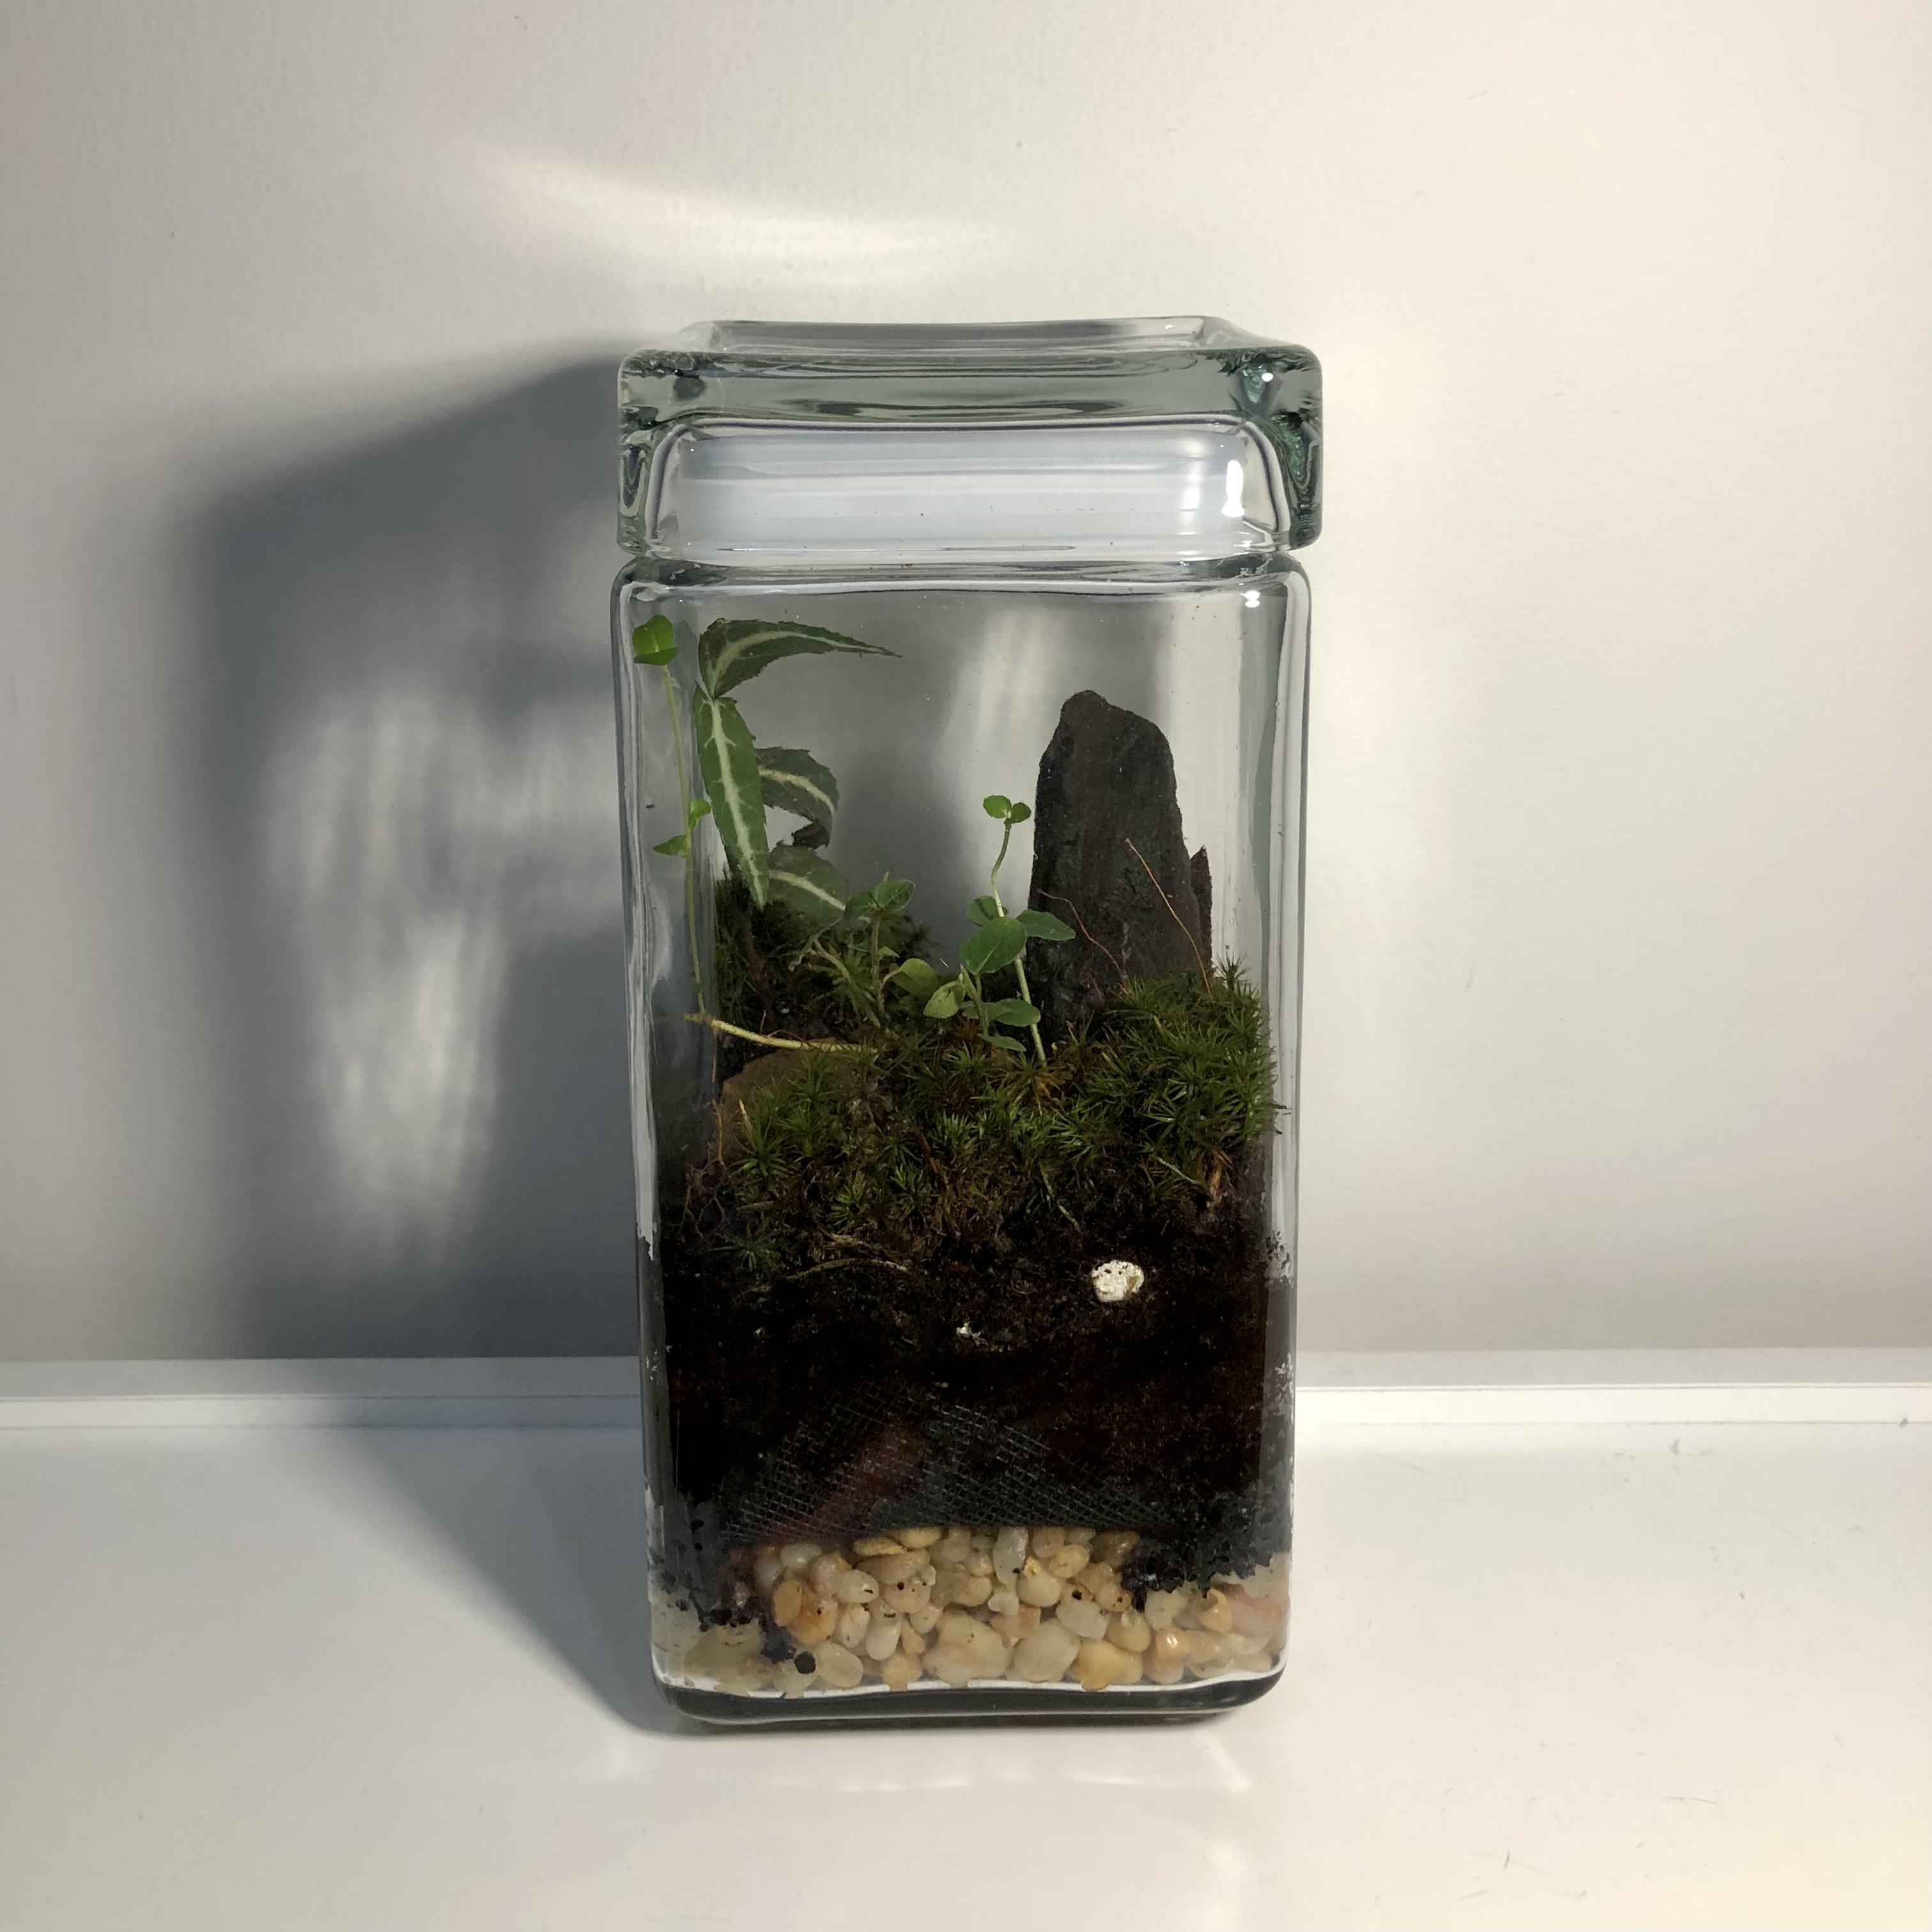 the front view of a rectangular terrarium - a glass jar with layers of gravel and soil on the bottom, with moss, small plants and a small rock positioned on the right side, on top.